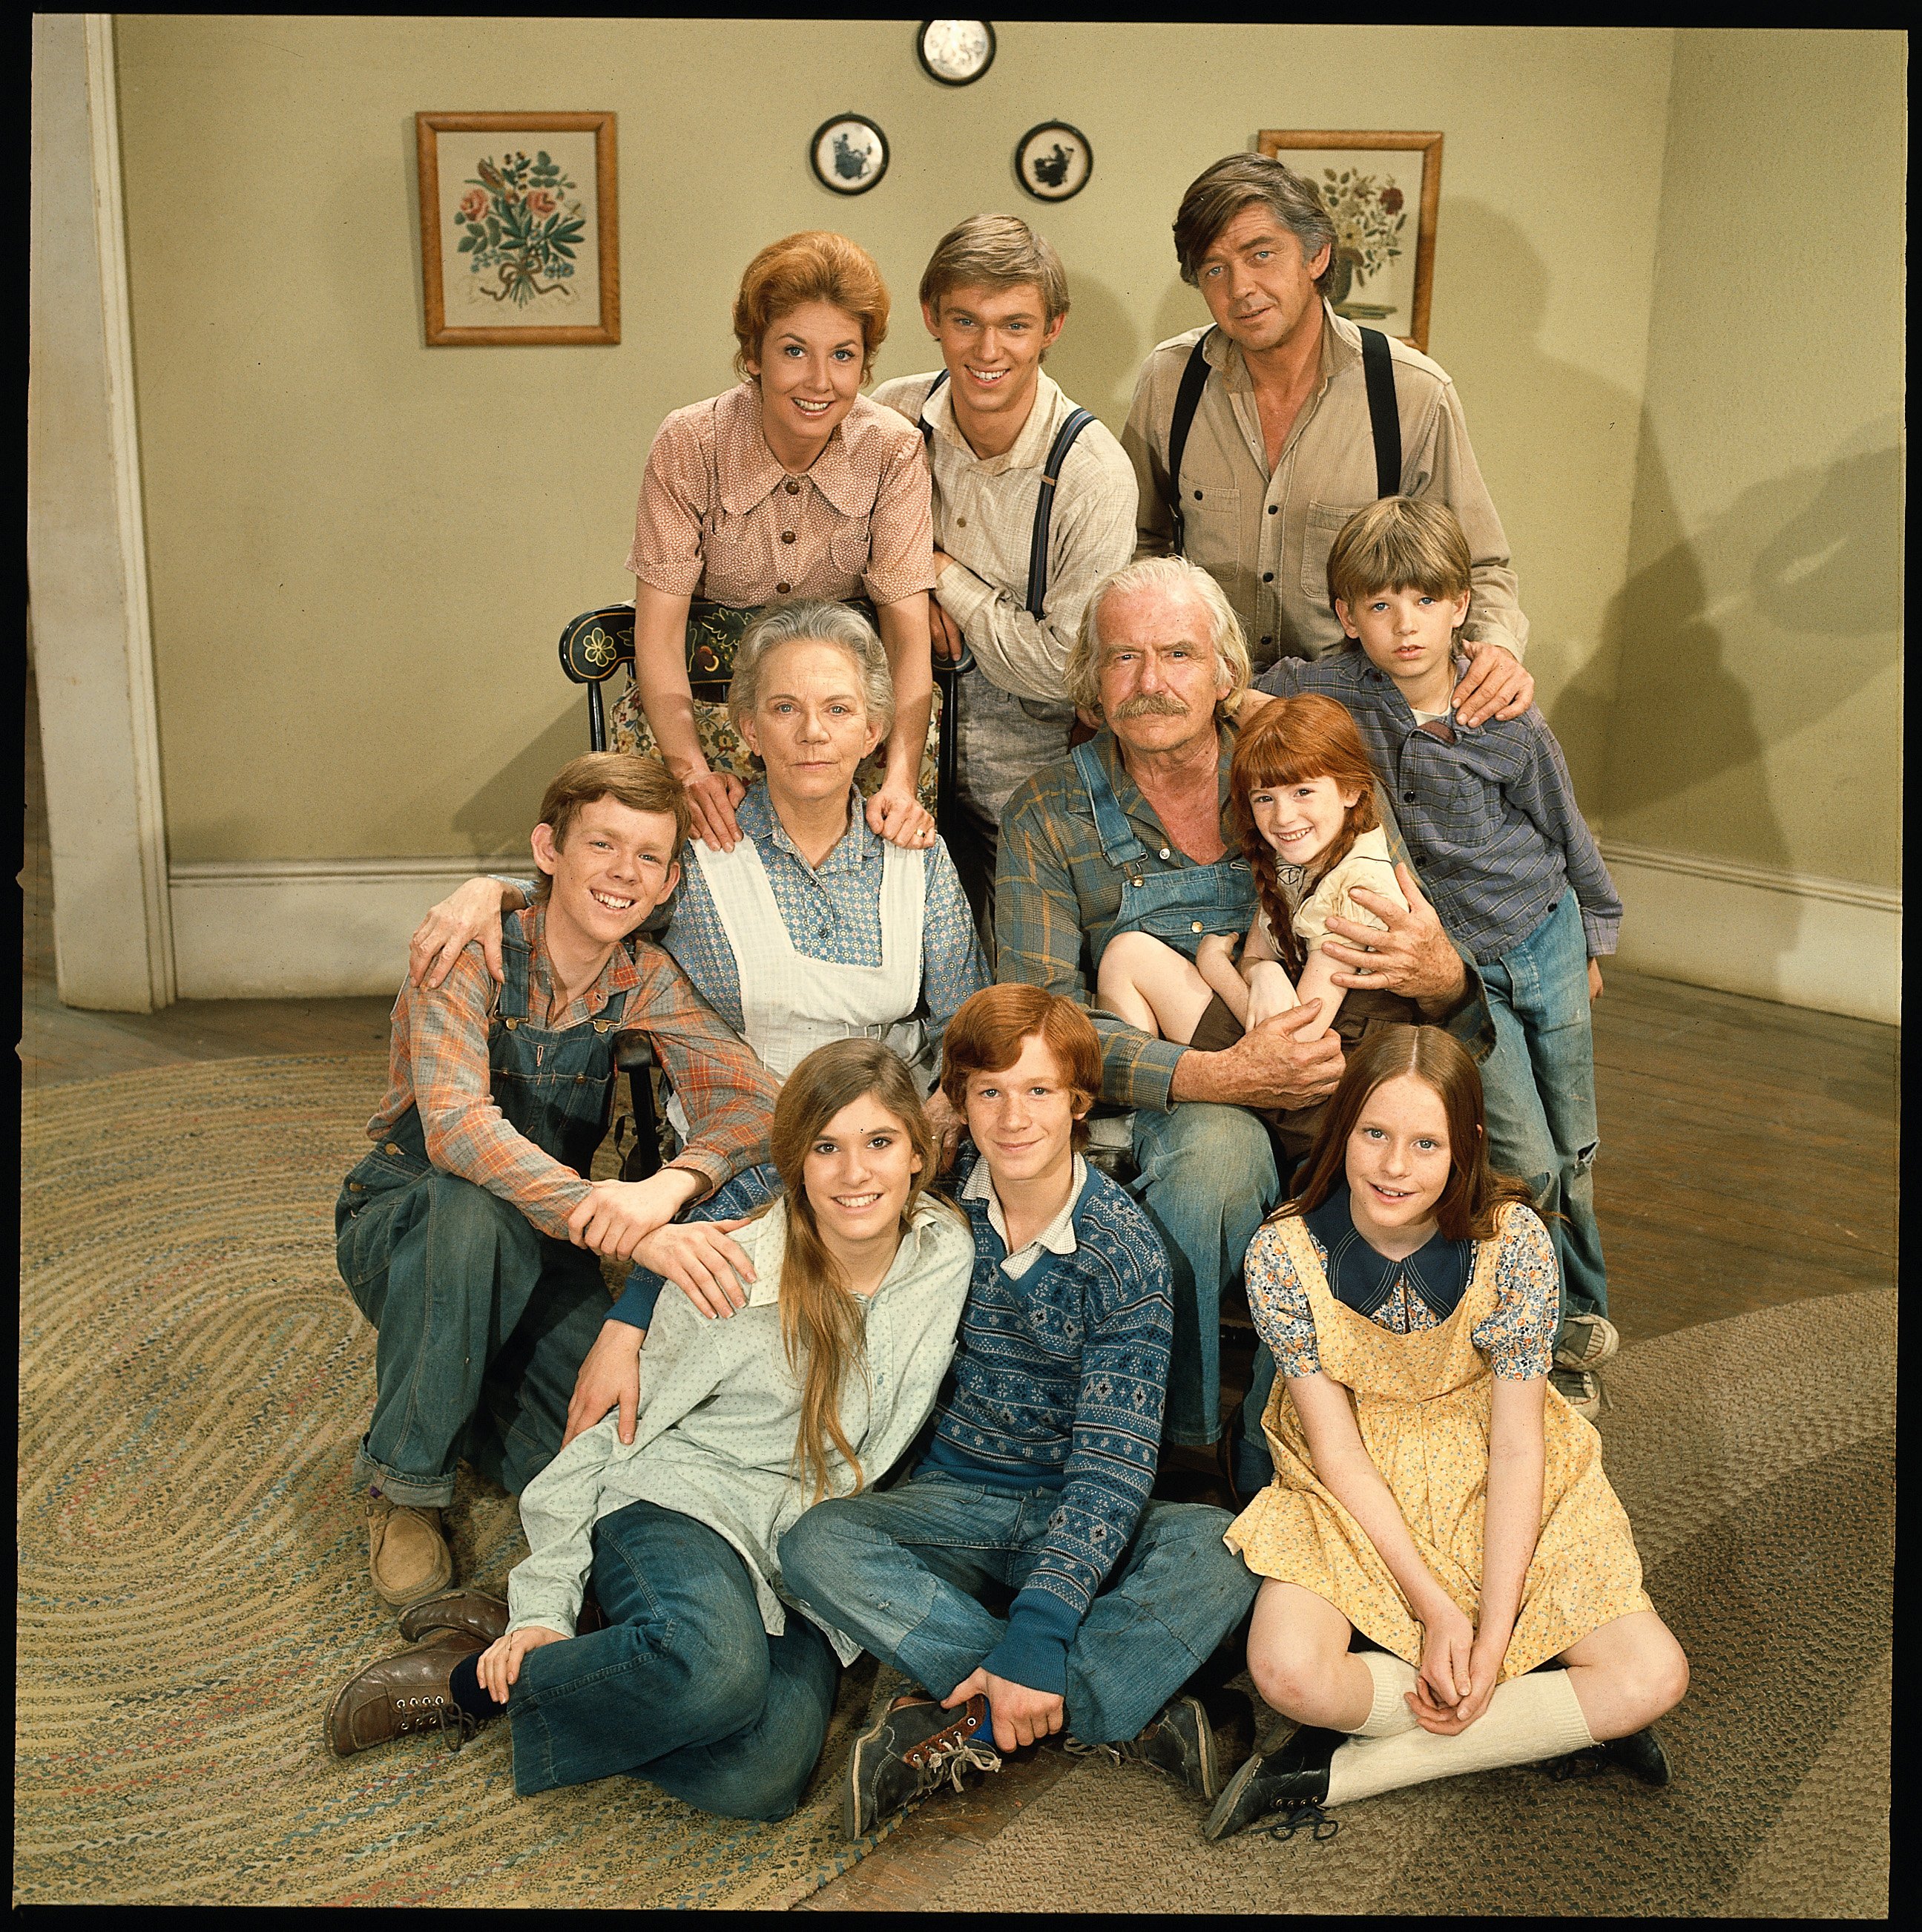 Pictured: The cast of the hit television series "The Waltons" poses for a promotional photo. L-R: (back row) Michael Learned, Richard Thomas and Ralph Waite; (center row) Jon Walmsley, Ellen Corby, Will Geer, Kami Cotler and David W. Harper; (bottom row) Judy Norton Taylor, Eric Scott and Elizabeth McDonough in 1972 | Photo: Getty Images